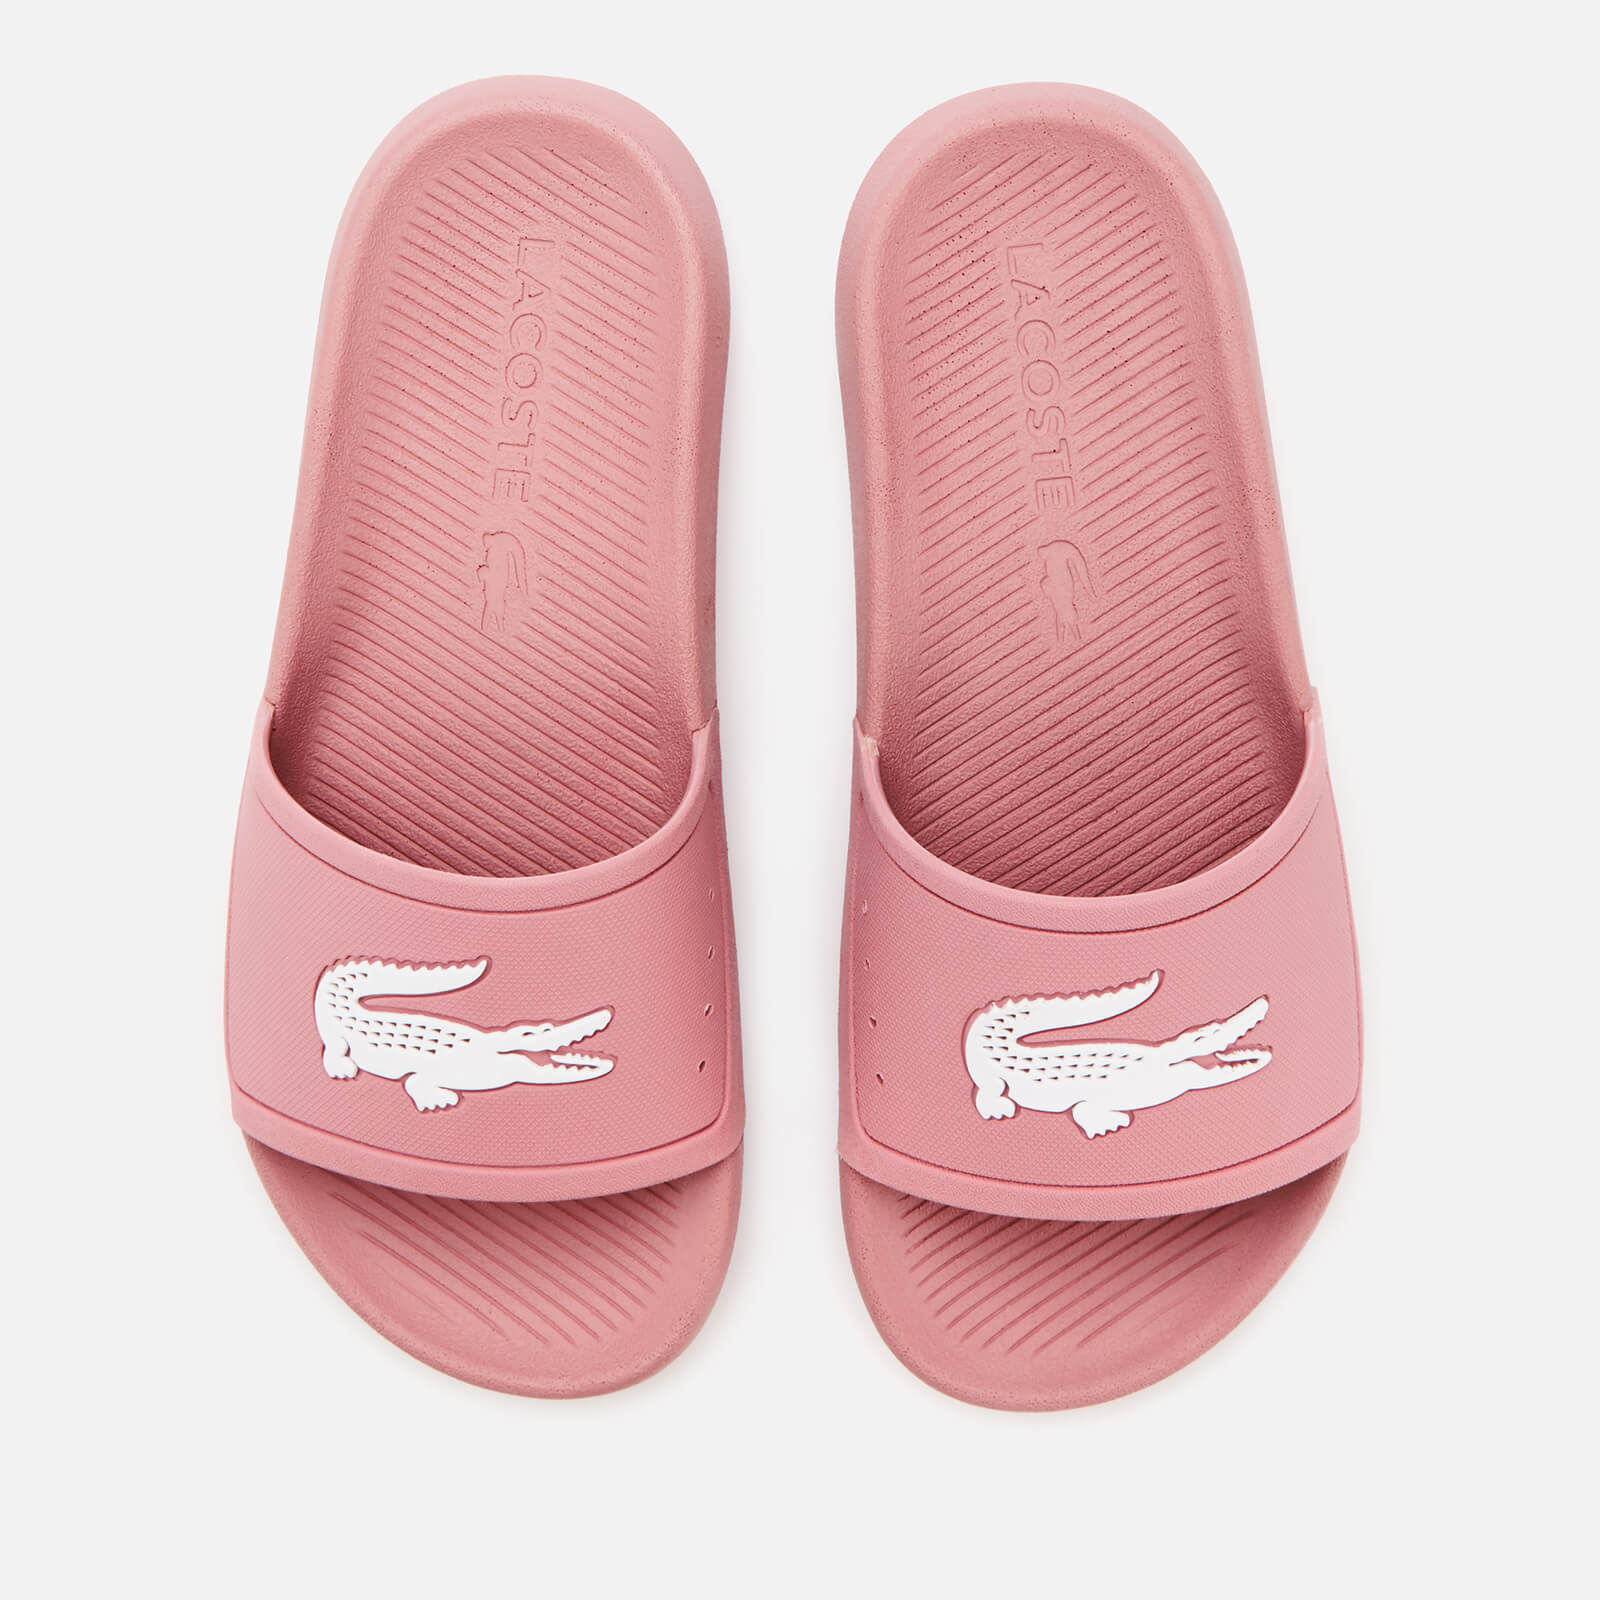 lacoste slides womens pink - 58% OFF 